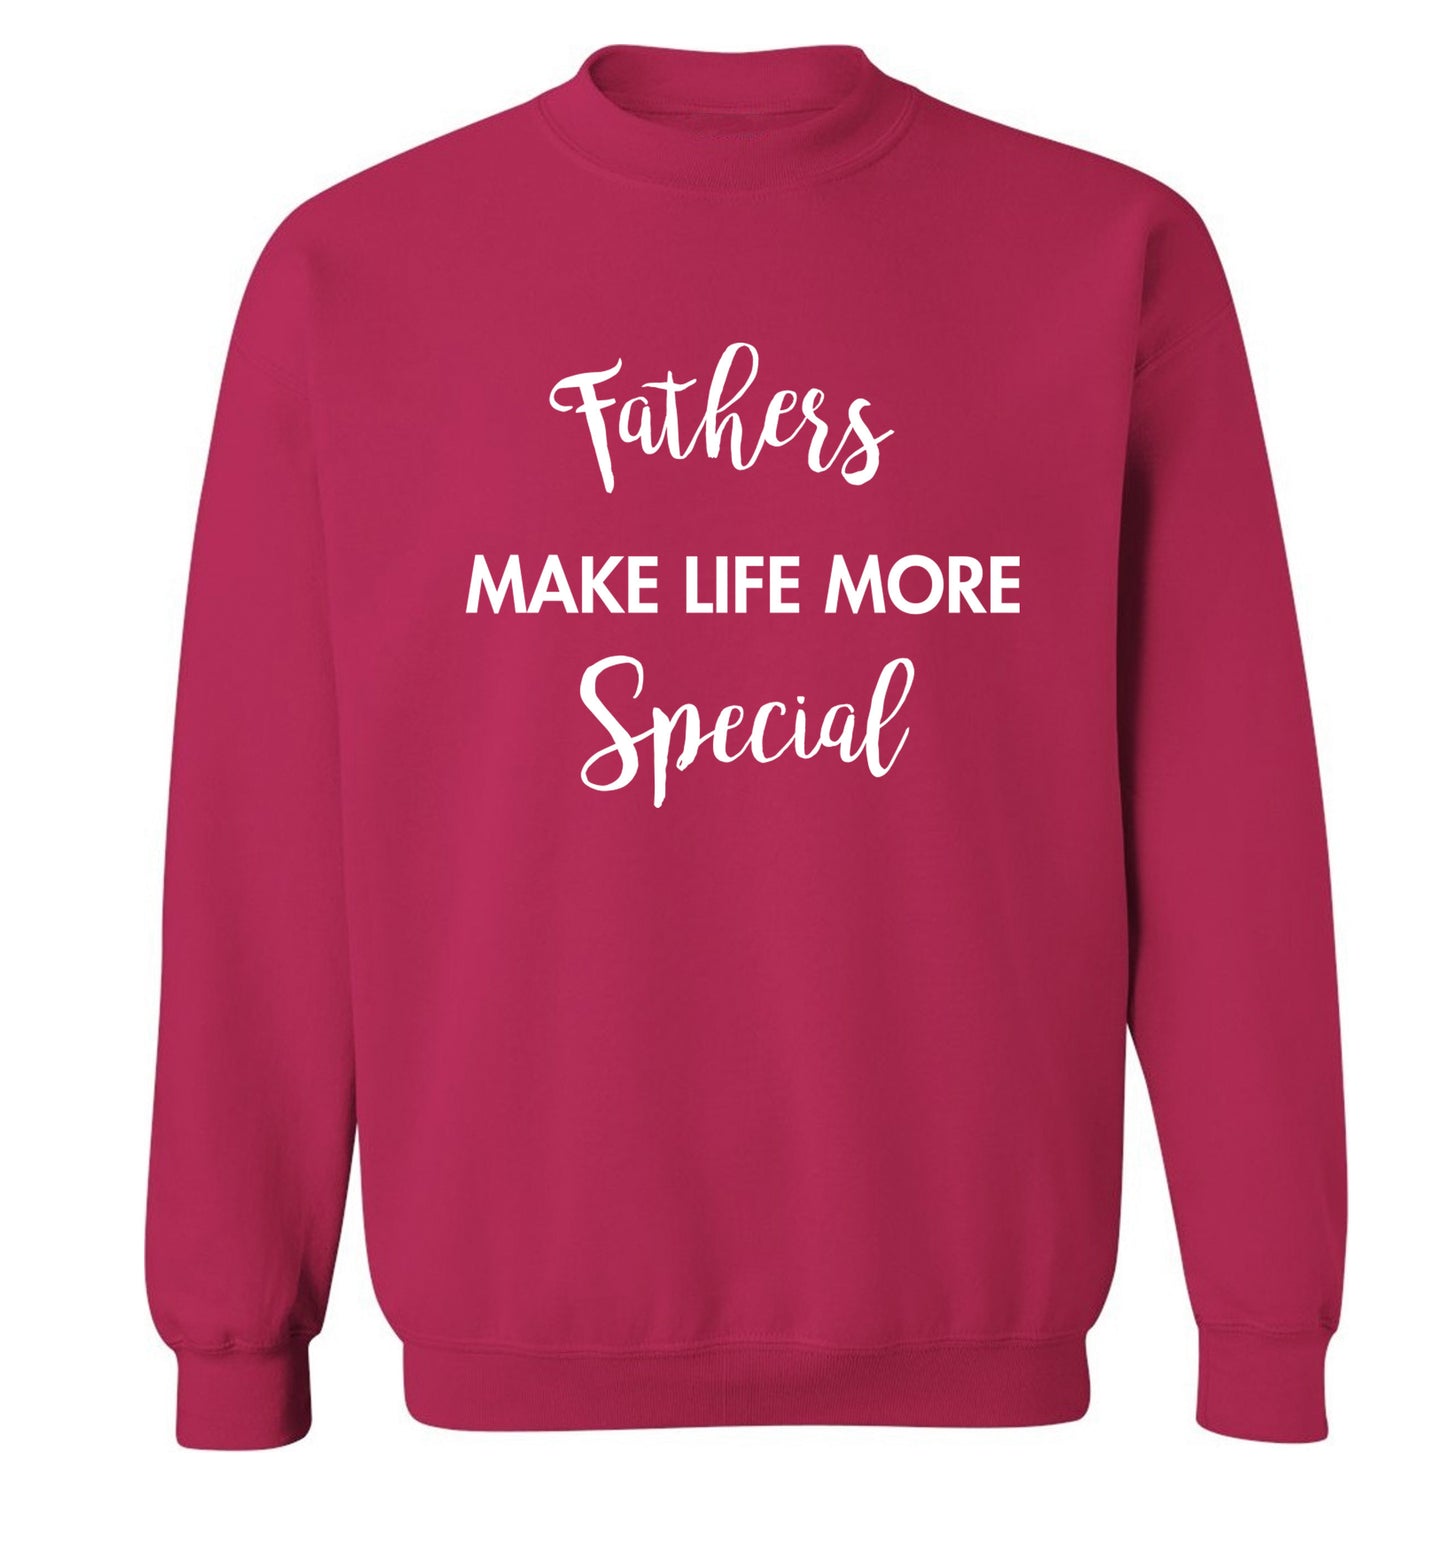 Fathers make life more special Adult's unisex pink Sweater 2XL